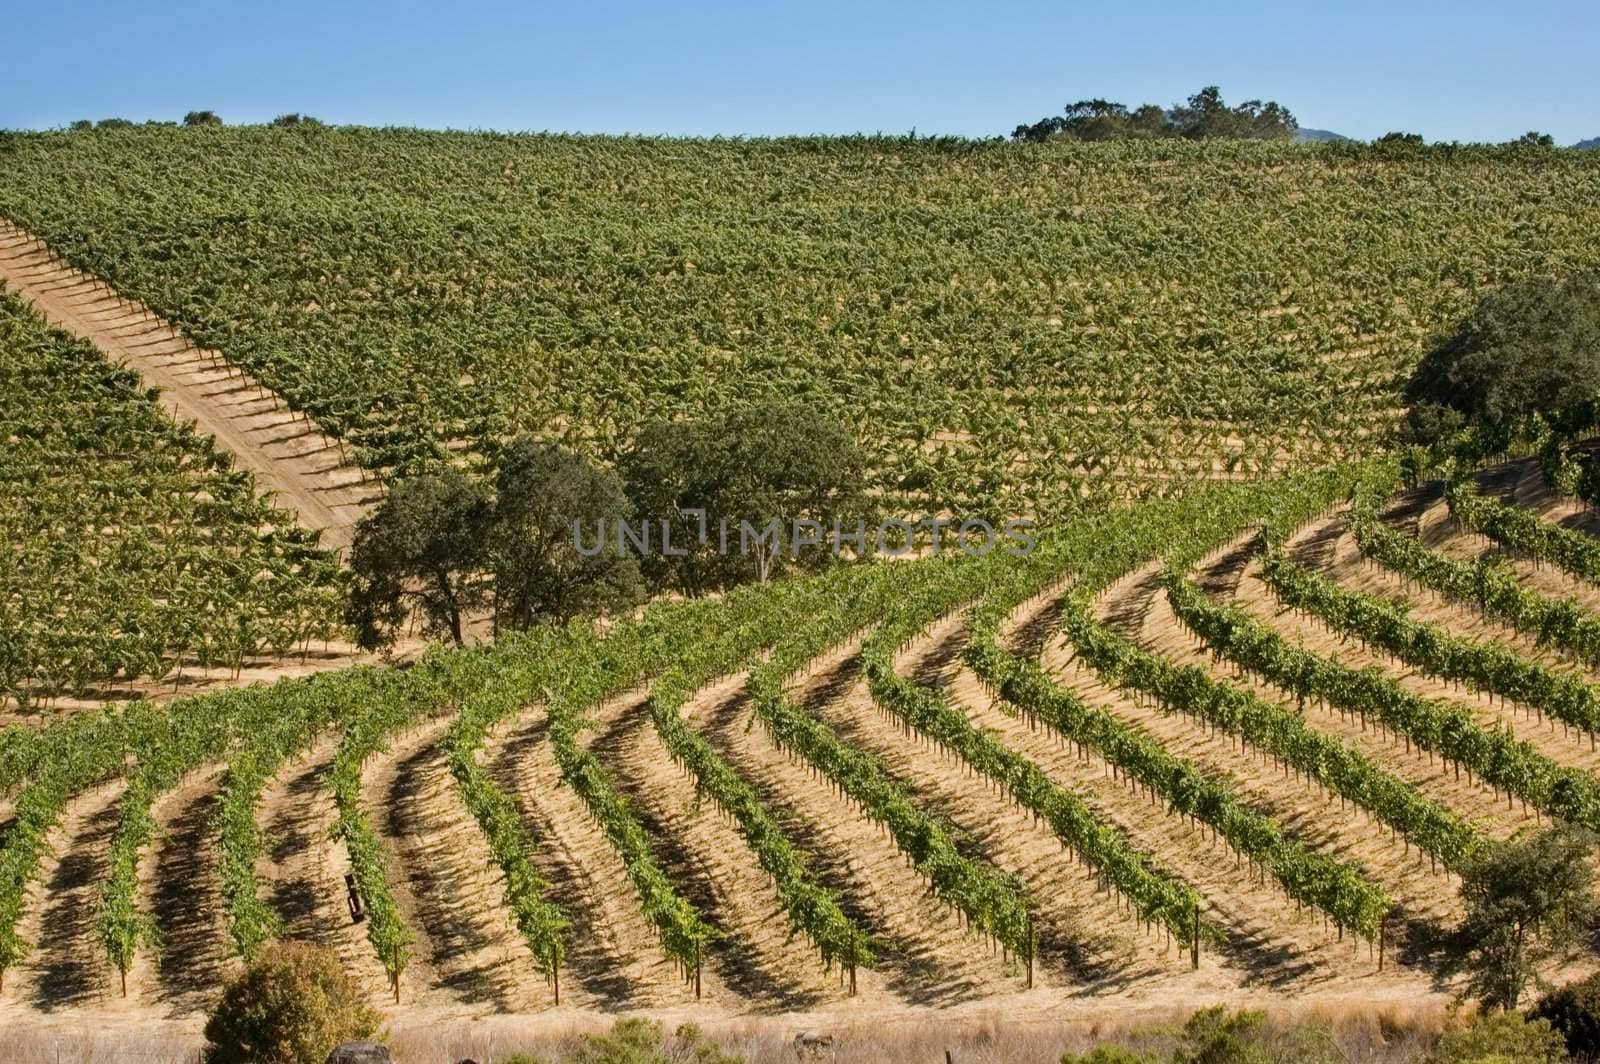 Rows of supported and trained vines in a terraced vineyard in the rolling hills of Northern California